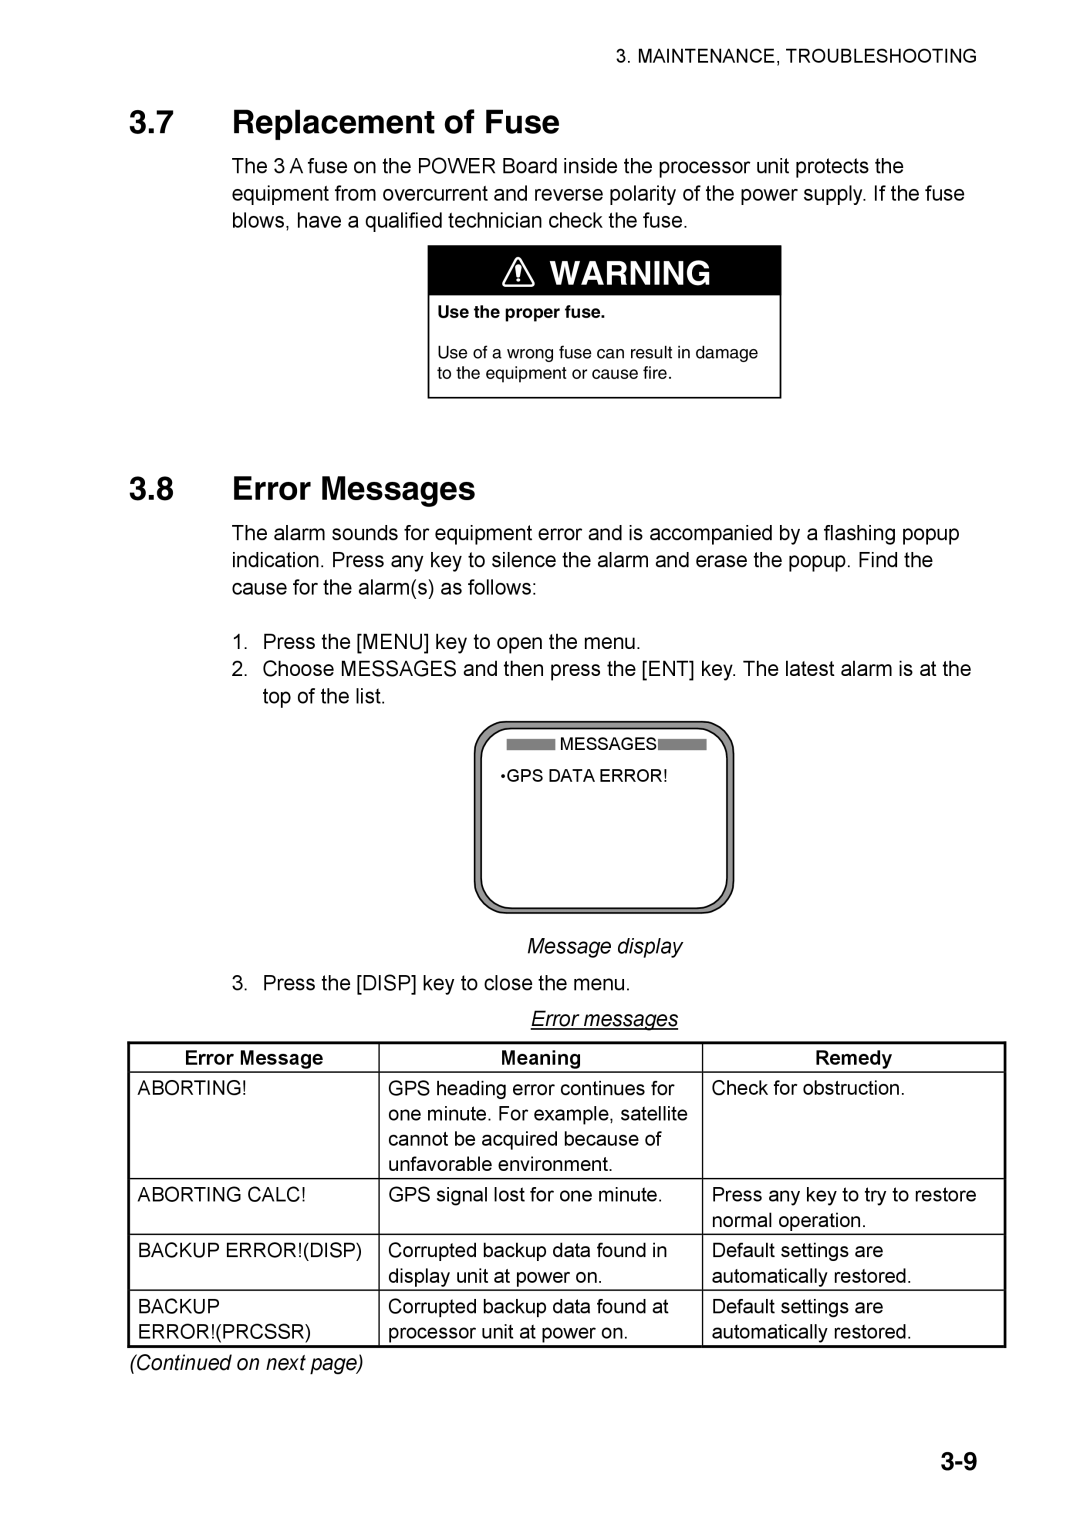 Furuno SC-110 manual 3.7Replacement of Fuse, 3.8Error Messages, Message display, Meaning, Continued on next page, Remedy 